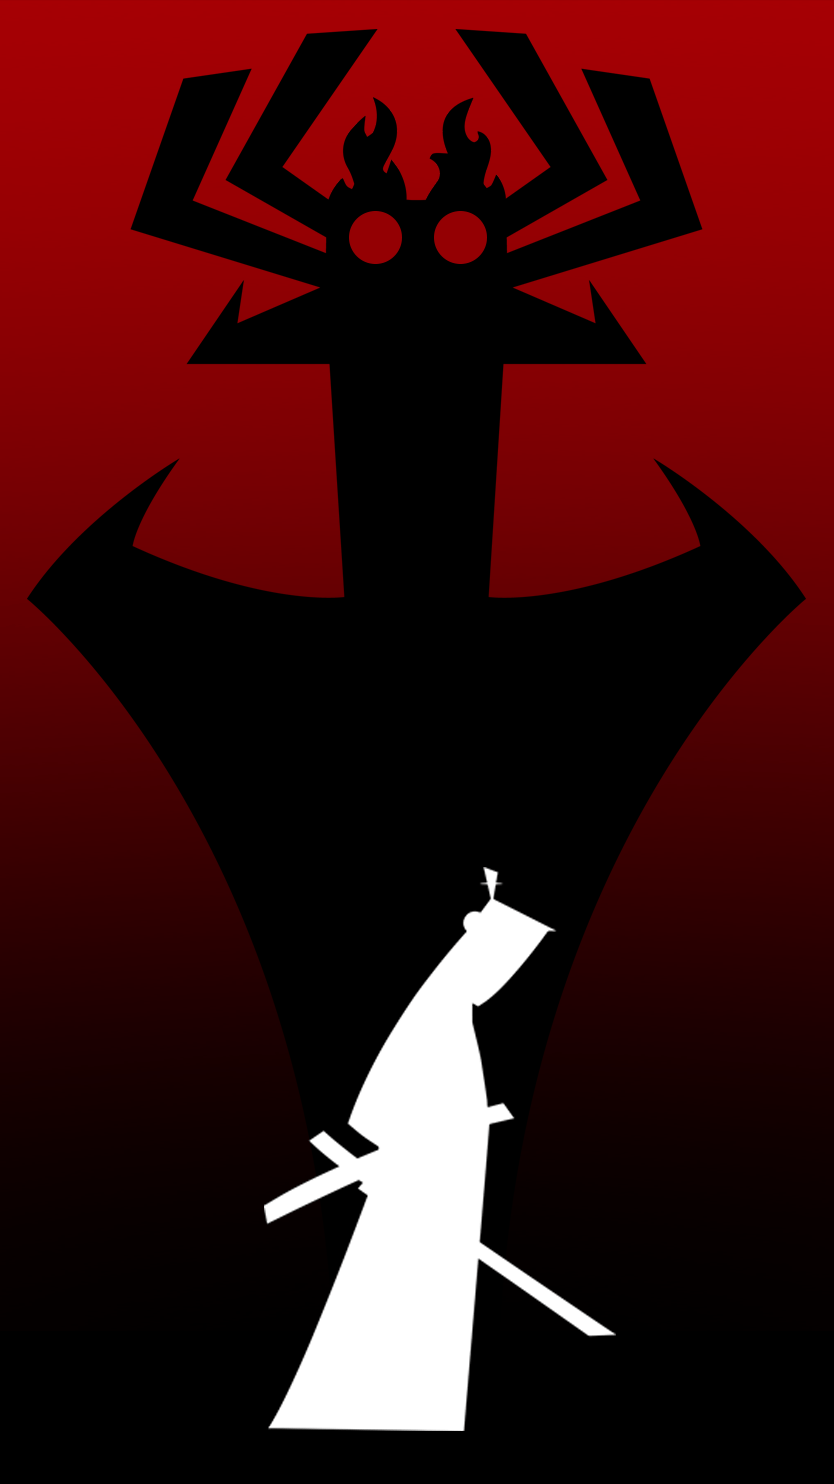 In Honor Of The New Season, Here's A Samurai Jack iPhone Wallpaper I Made A While Ago